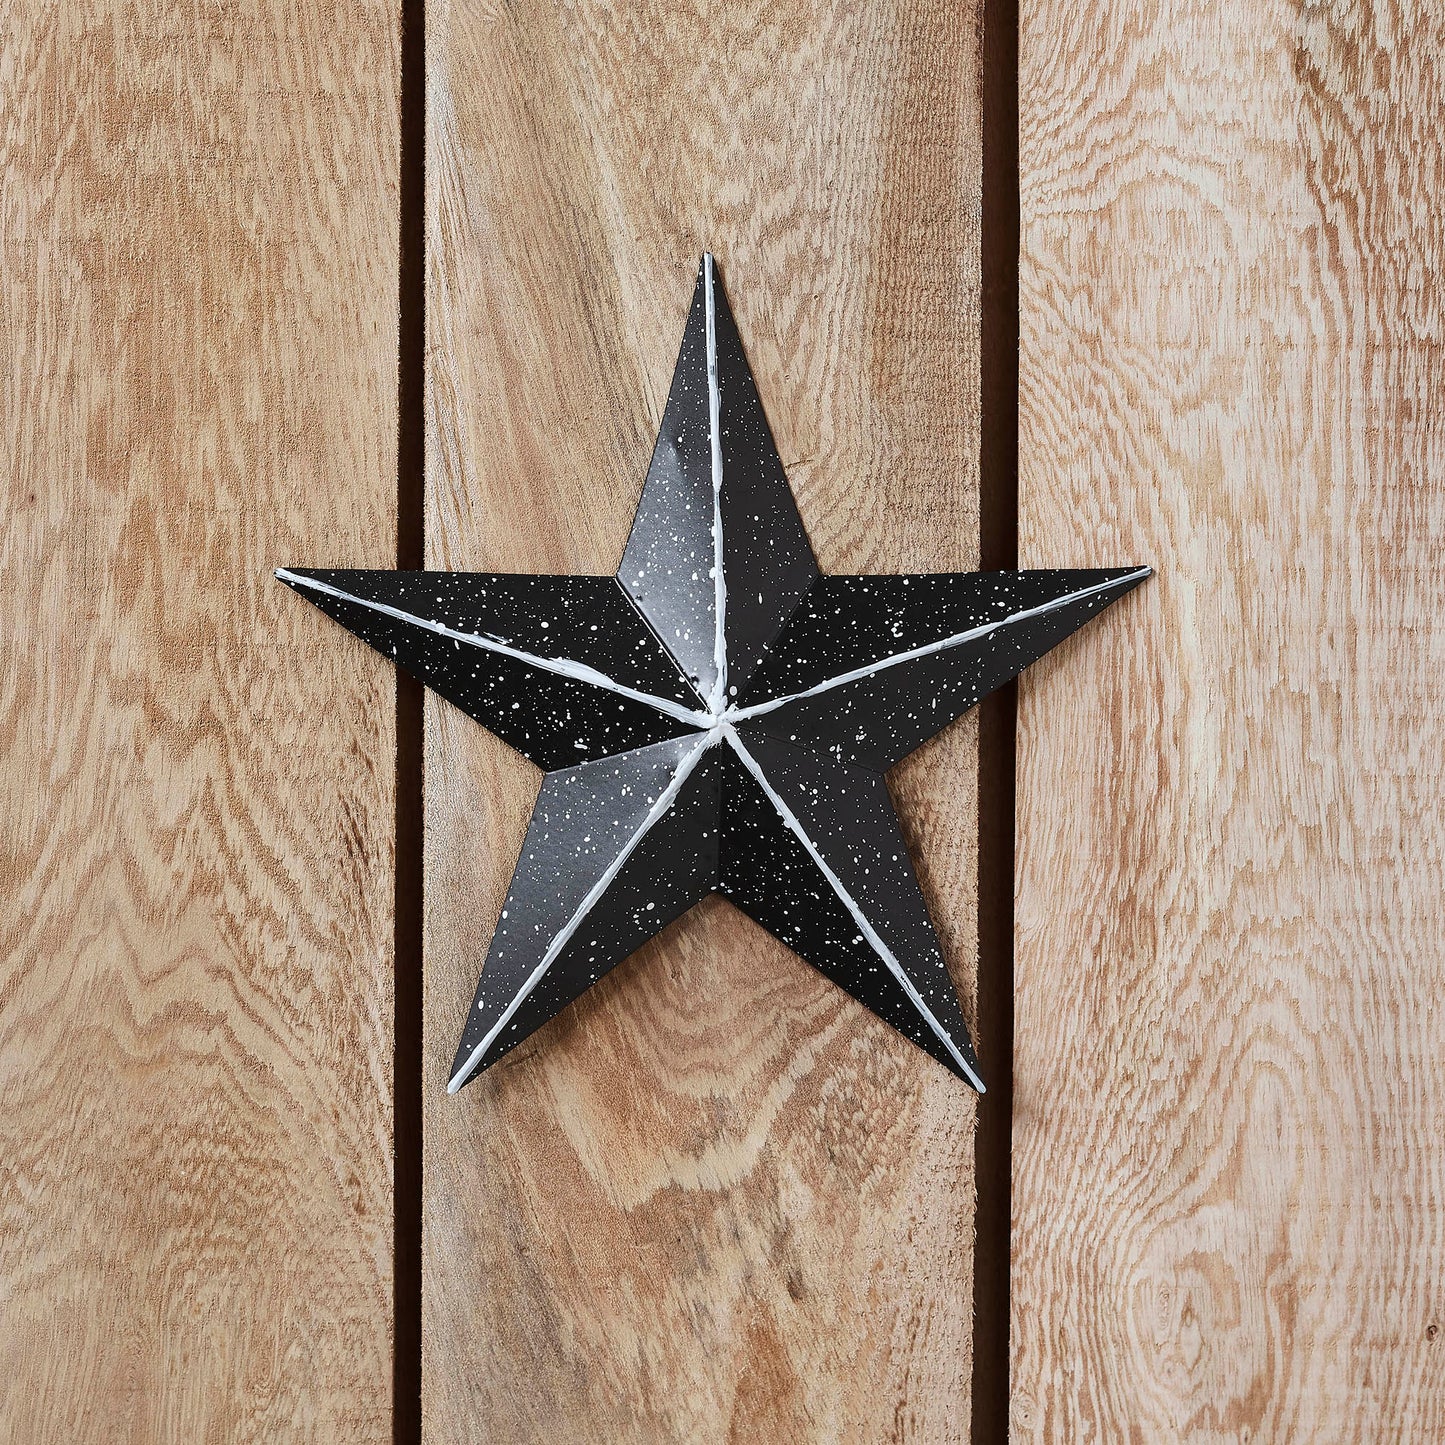 VHC Brands Patriotic Faceted Metal Star Black Wall Hanging 8x8, Independence Day Decor, American Star Design, Distressed Appearance Metal Wall Hanging,  Star Shape, Country, Charcoal Black